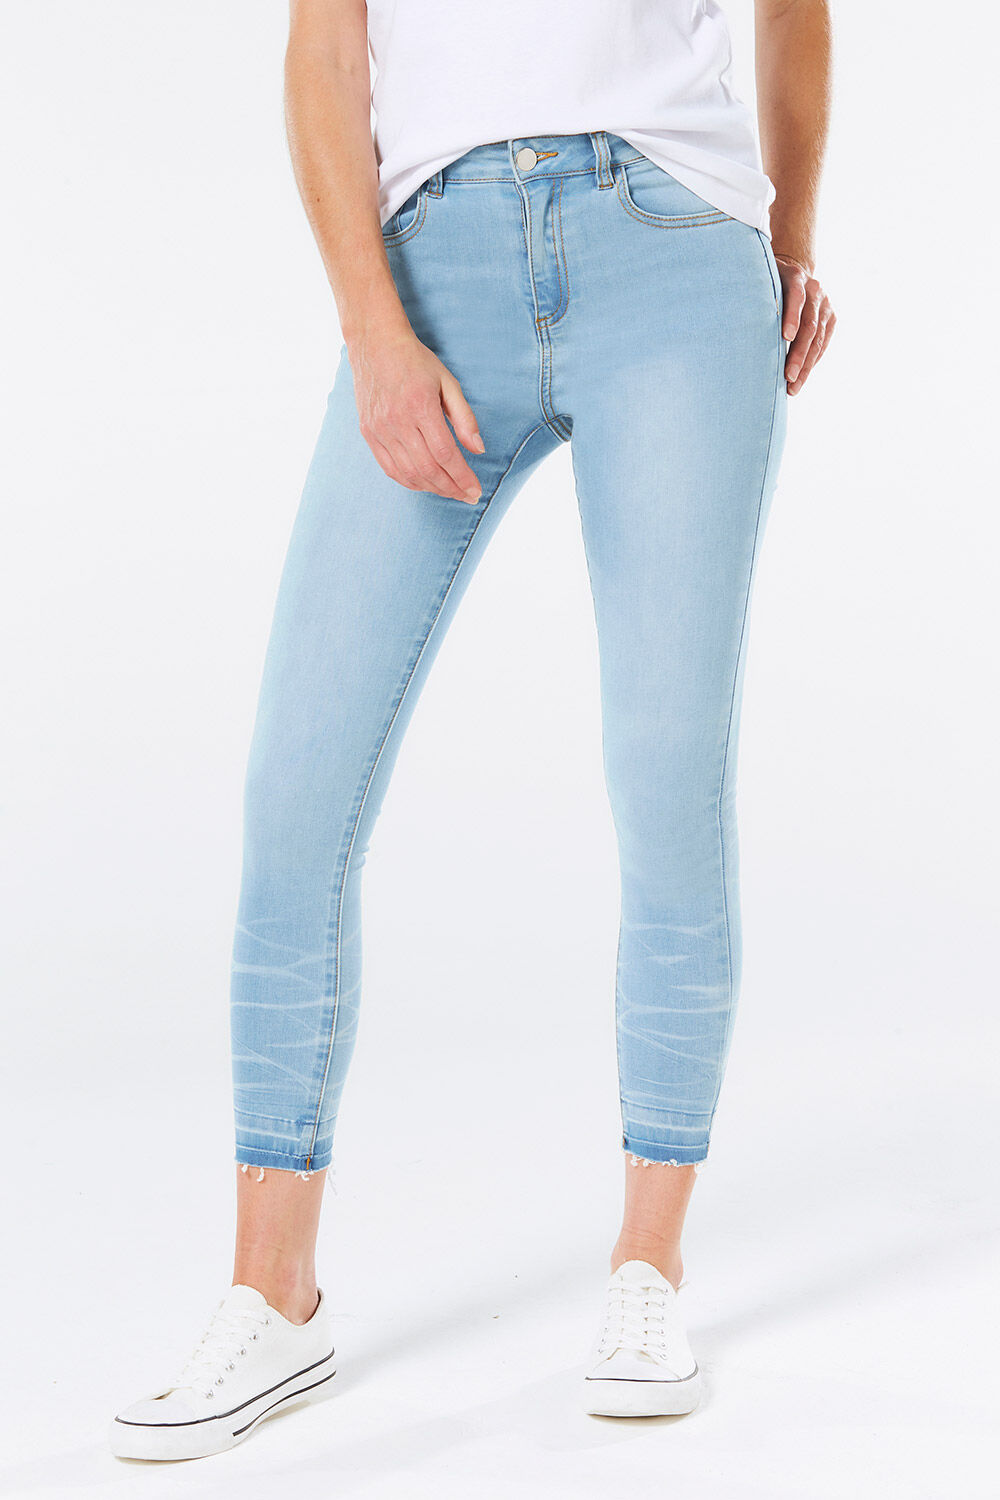 jeans with rips on the side